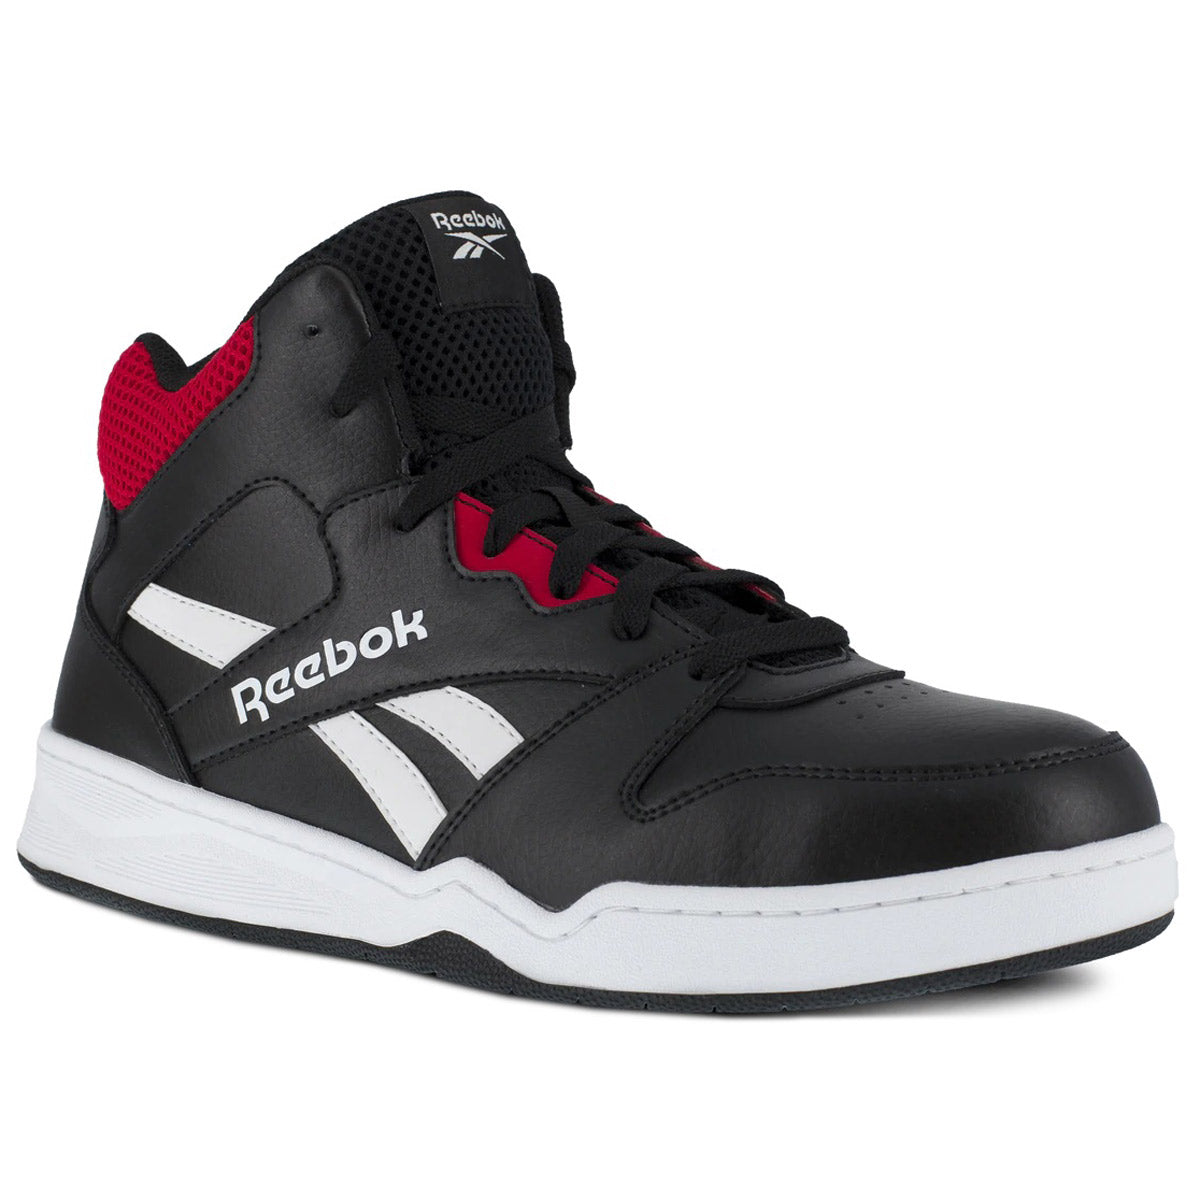 Black and white Reebok Work Composite Toe BB4500 Mid high-top safety toe boot with red accents.